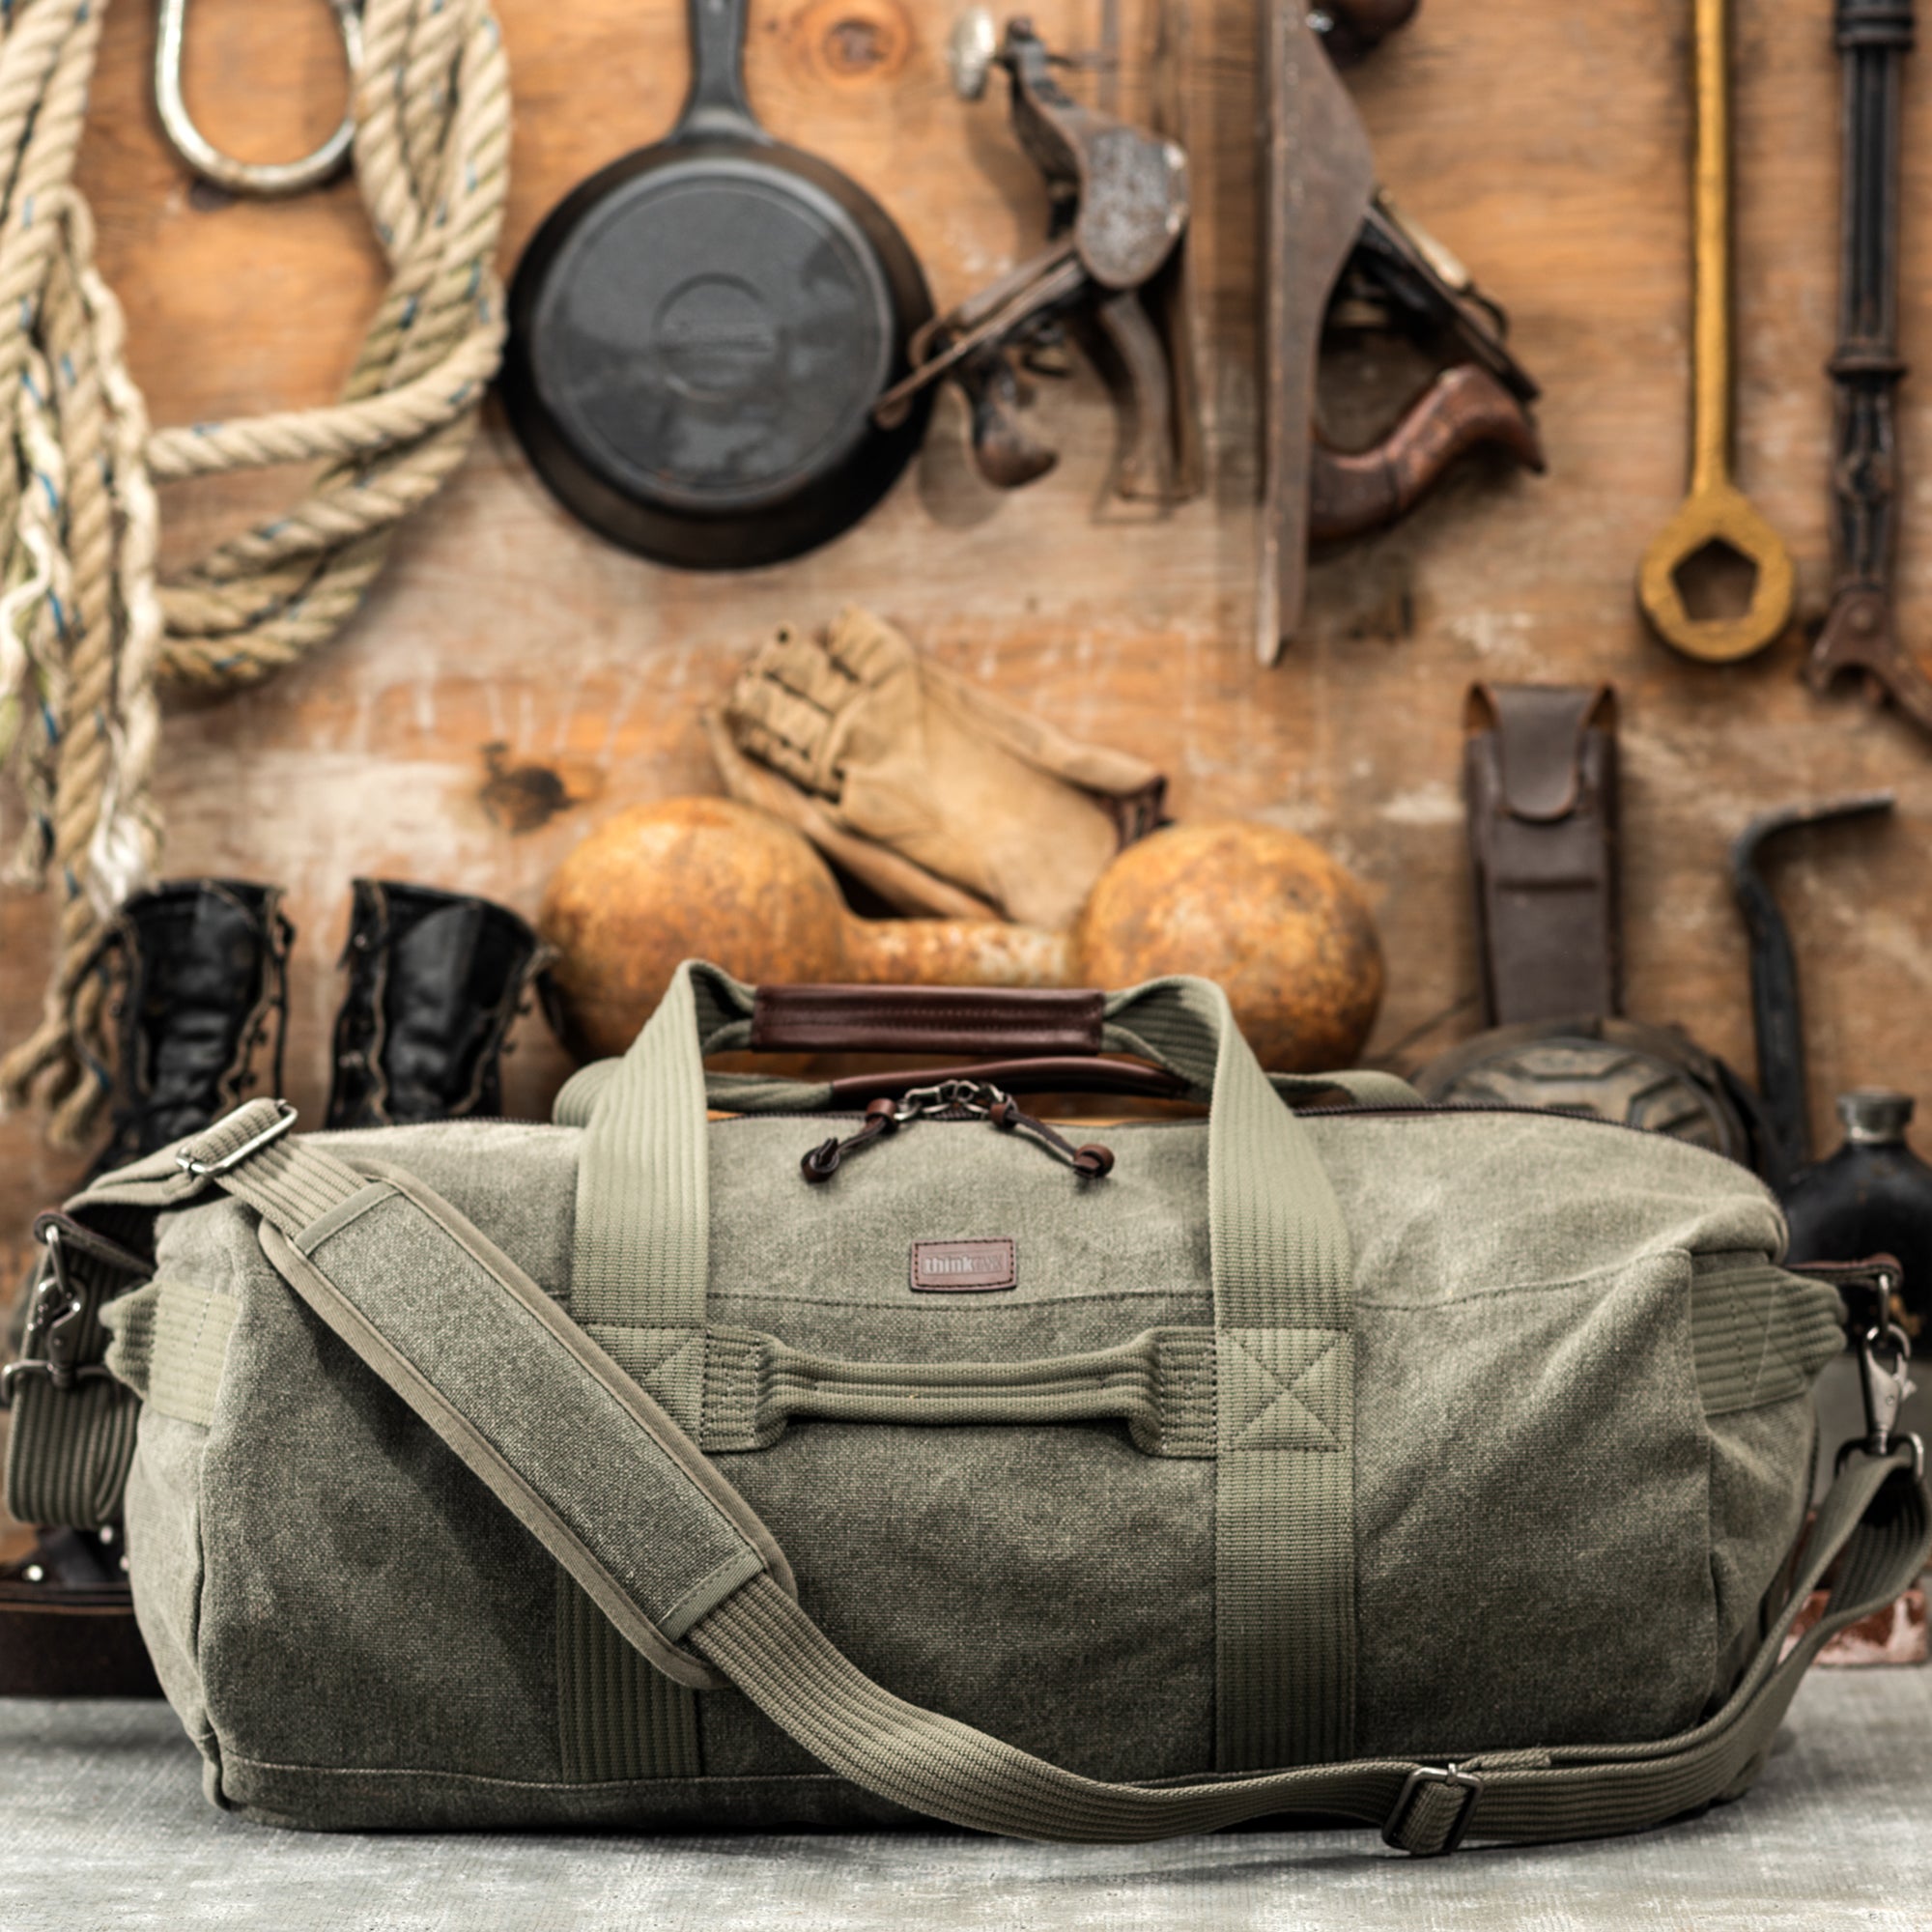 Retrospective® 75 Duffel Bag for travel, sports, and adventure – Think Tank  Photo